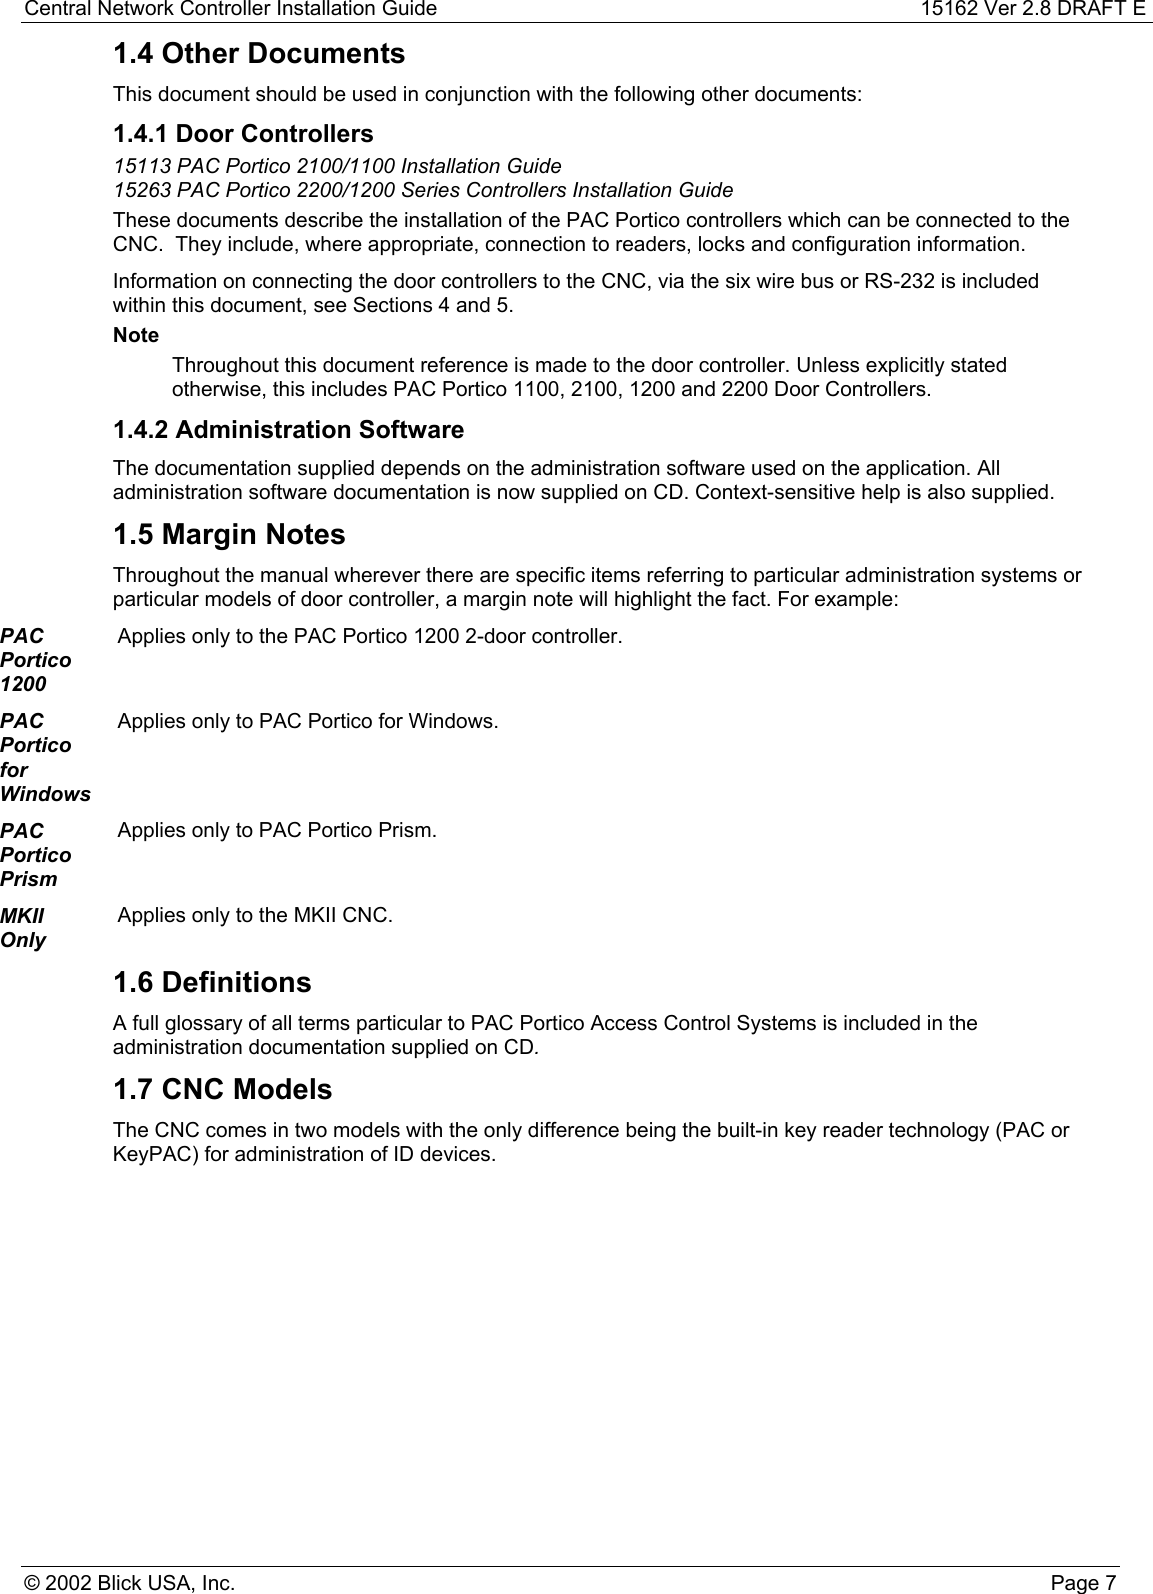 Central Network Controller Installation Guide 15162 Ver 2.8 DRAFT E© 2002 Blick USA, Inc. Page 71.4 Other DocumentsThis document should be used in conjunction with the following other documents:1.4.1 Door Controllers15113 PAC Portico 2100/1100 Installation Guide15263 PAC Portico 2200/1200 Series Controllers Installation GuideThese documents describe the installation of the PAC Portico controllers which can be connected to theCNC.  They include, where appropriate, connection to readers, locks and configuration information.Information on connecting the door controllers to the CNC, via the six wire bus or RS-232 is includedwithin this document, see Sections 4 and 5.NoteThroughout this document reference is made to the door controller. Unless explicitly statedotherwise, this includes PAC Portico 1100, 2100, 1200 and 2200 Door Controllers.1.4.2 Administration SoftwareThe documentation supplied depends on the administration software used on the application. Alladministration software documentation is now supplied on CD. Context-sensitive help is also supplied.1.5 Margin NotesThroughout the manual wherever there are specific items referring to particular administration systems orparticular models of door controller, a margin note will highlight the fact. For example:PACPortico1200Applies only to the PAC Portico 1200 2-door controller.PACPorticoforWindowsApplies only to PAC Portico for Windows.PACPorticoPrismApplies only to PAC Portico Prism.MKIIOnlyApplies only to the MKII CNC.1.6 DefinitionsA full glossary of all terms particular to PAC Portico Access Control Systems is included in theadministration documentation supplied on CD.1.7 CNC ModelsThe CNC comes in two models with the only difference being the built-in key reader technology (PAC orKeyPAC) for administration of ID devices.